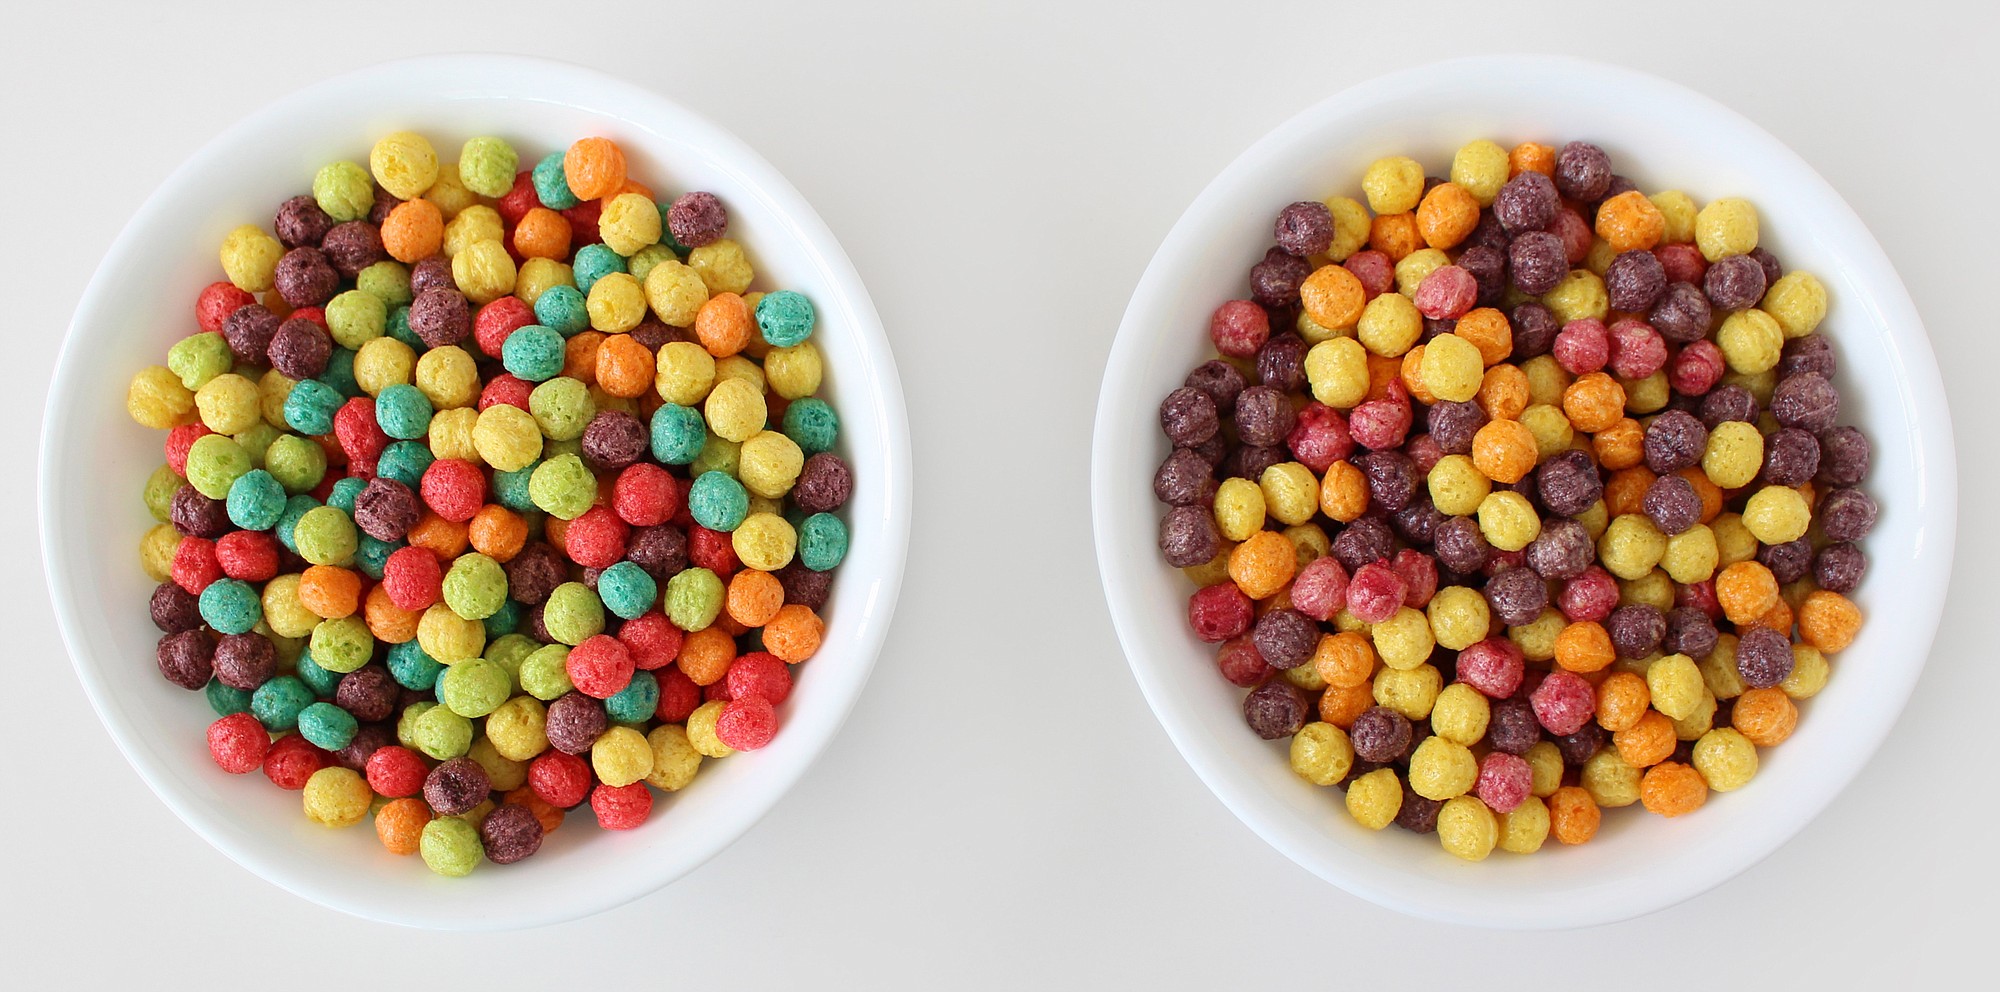 General Mills
A bowl of Trix cereal made with artificial colors and flavors, left, and a bowl of a reformulated version, made with natural flavors and colorings, right.